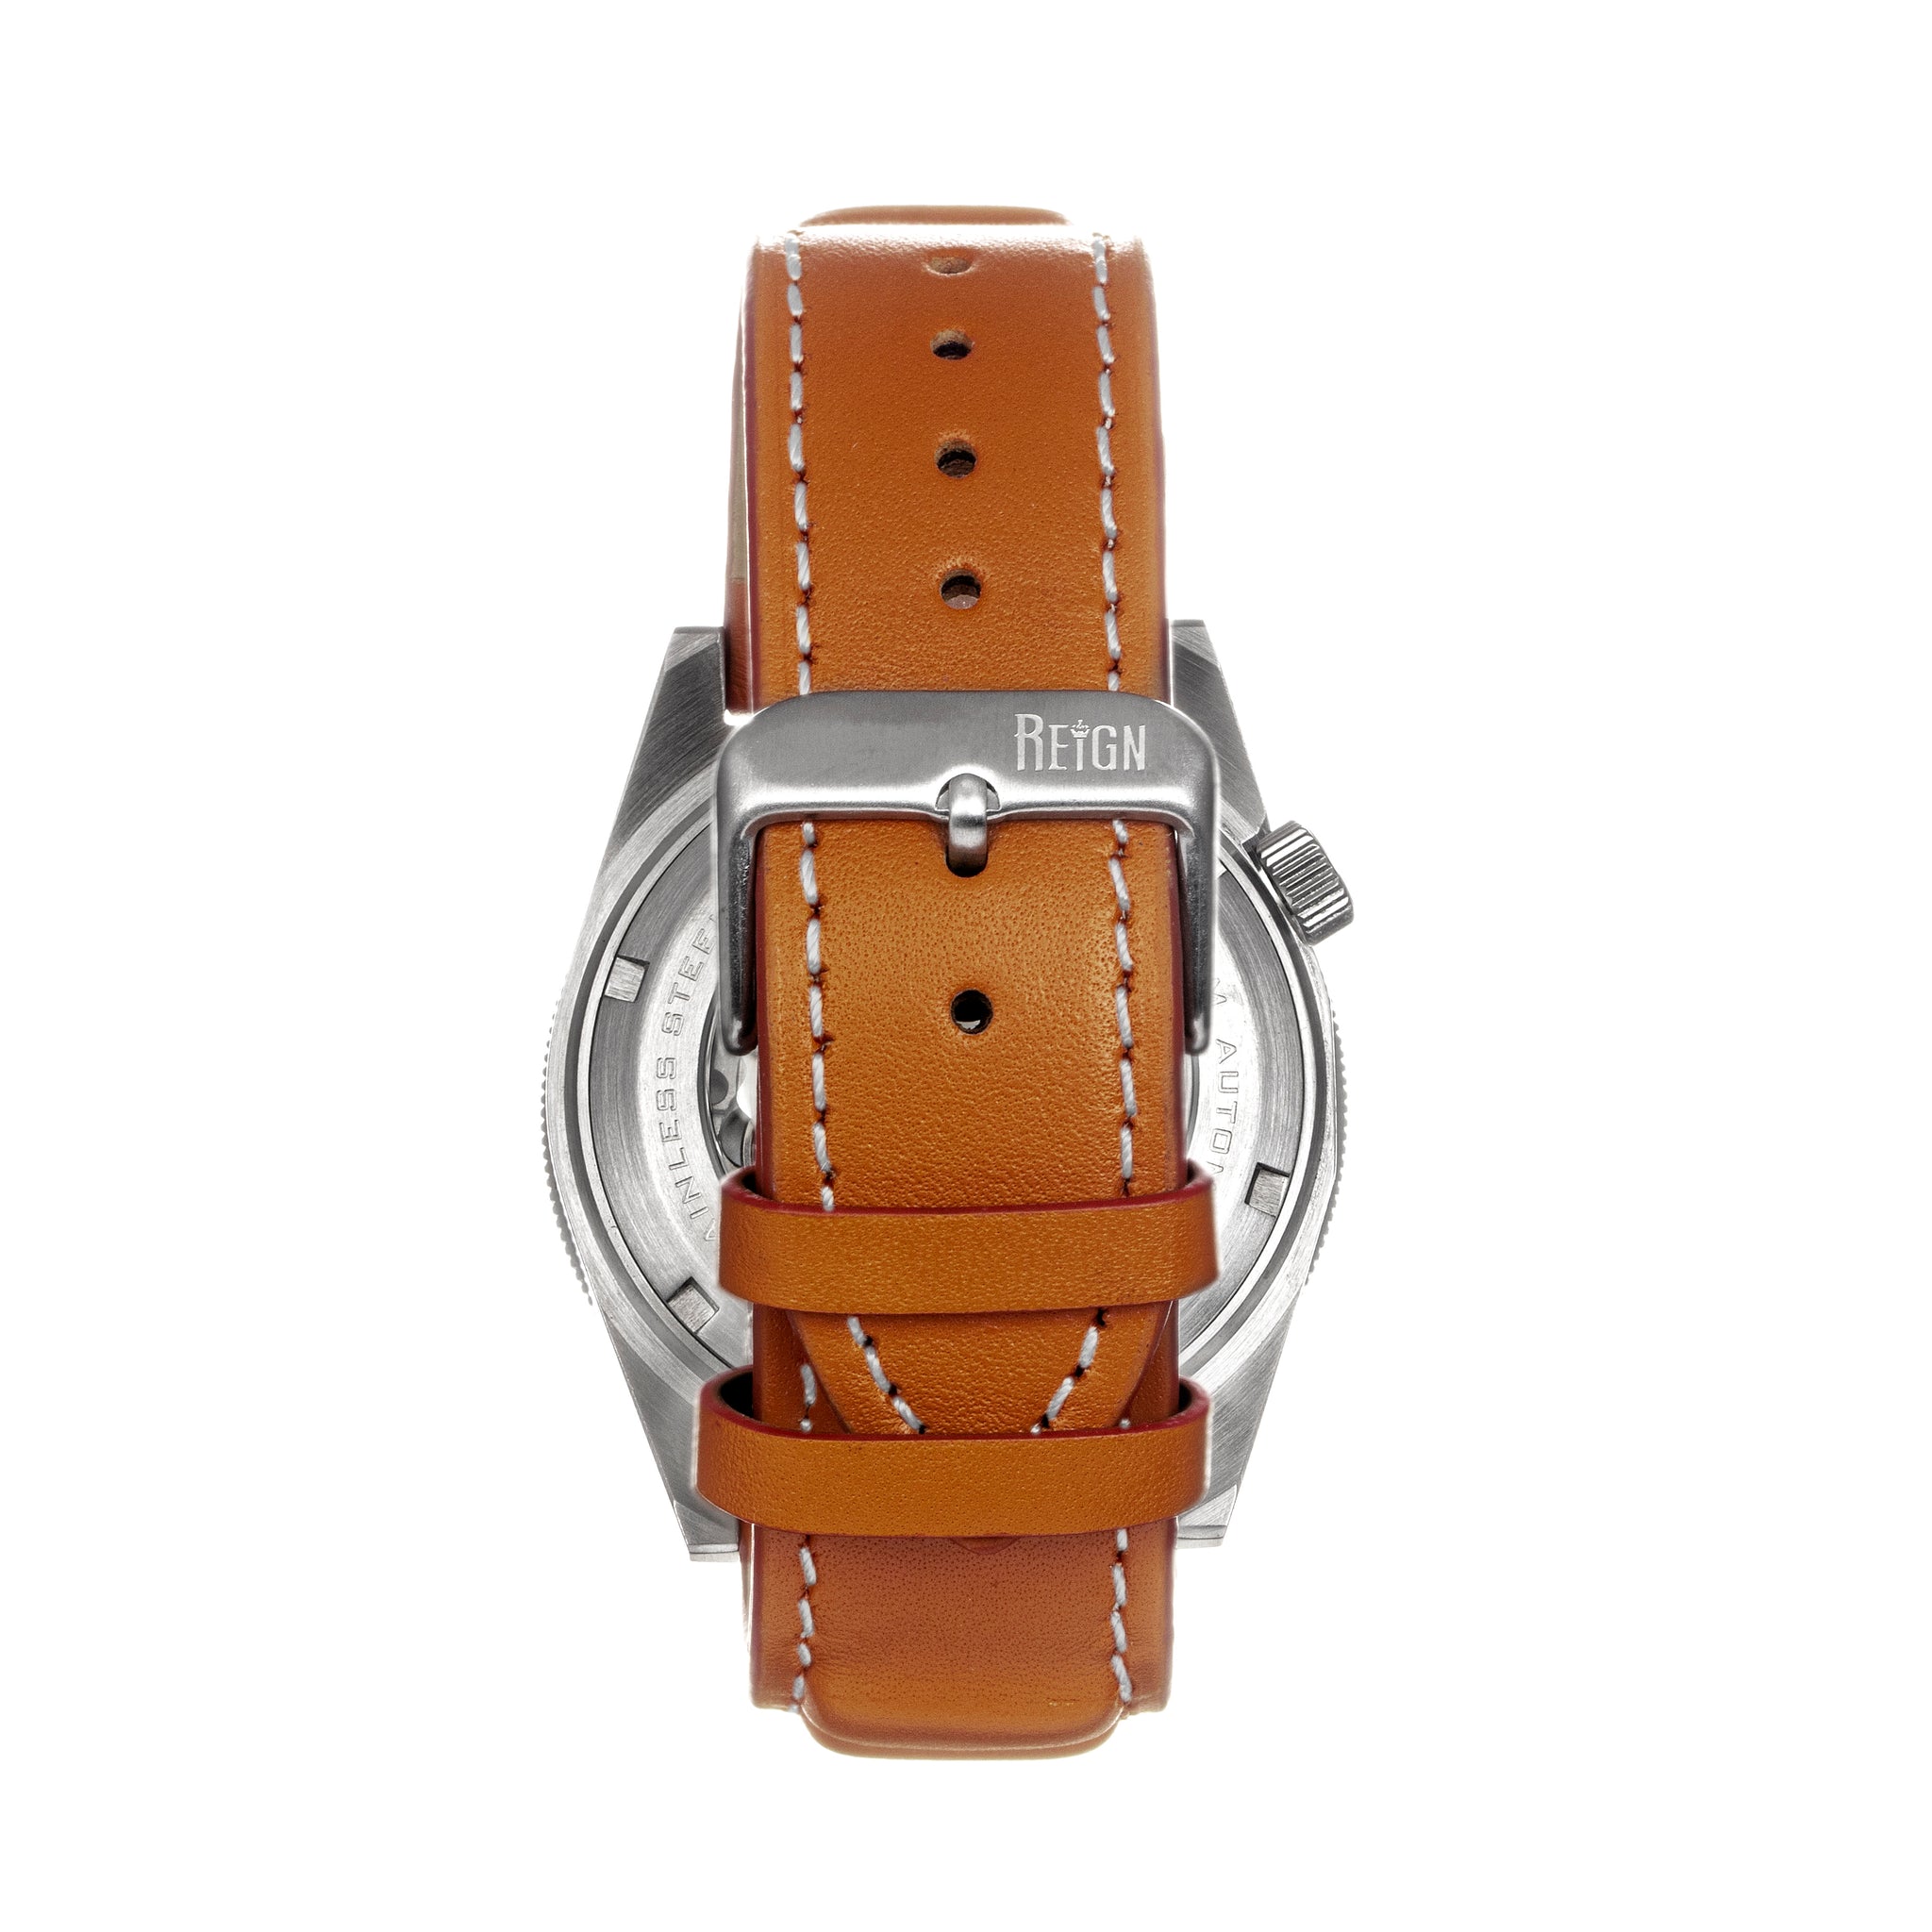 Reign Francis Leather-Band Watch w/Date- -Brown/Blue - REIRN6304